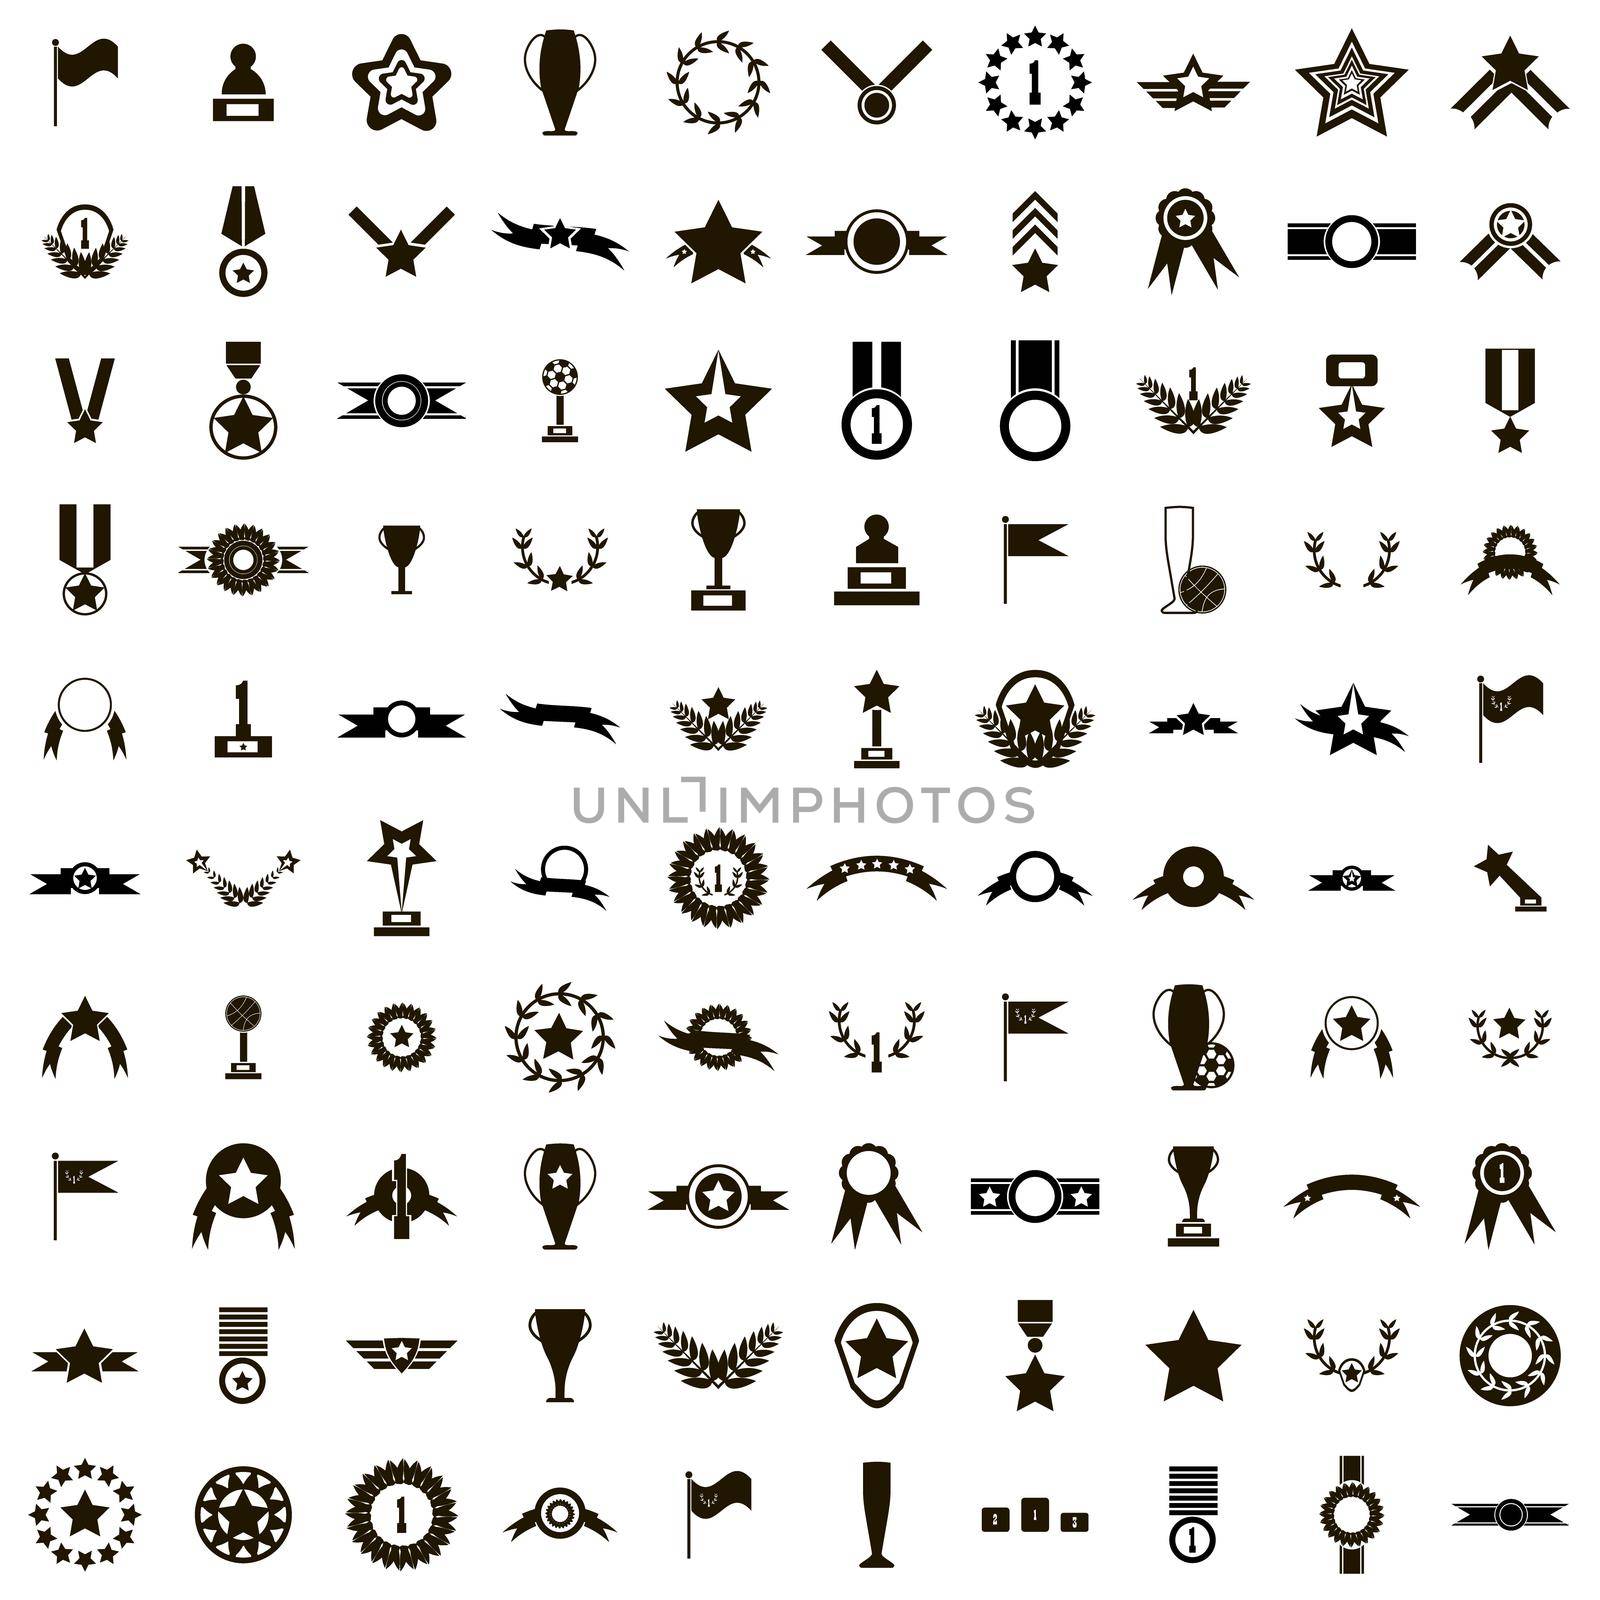 100 Awards icons set, simple style by ylivdesign